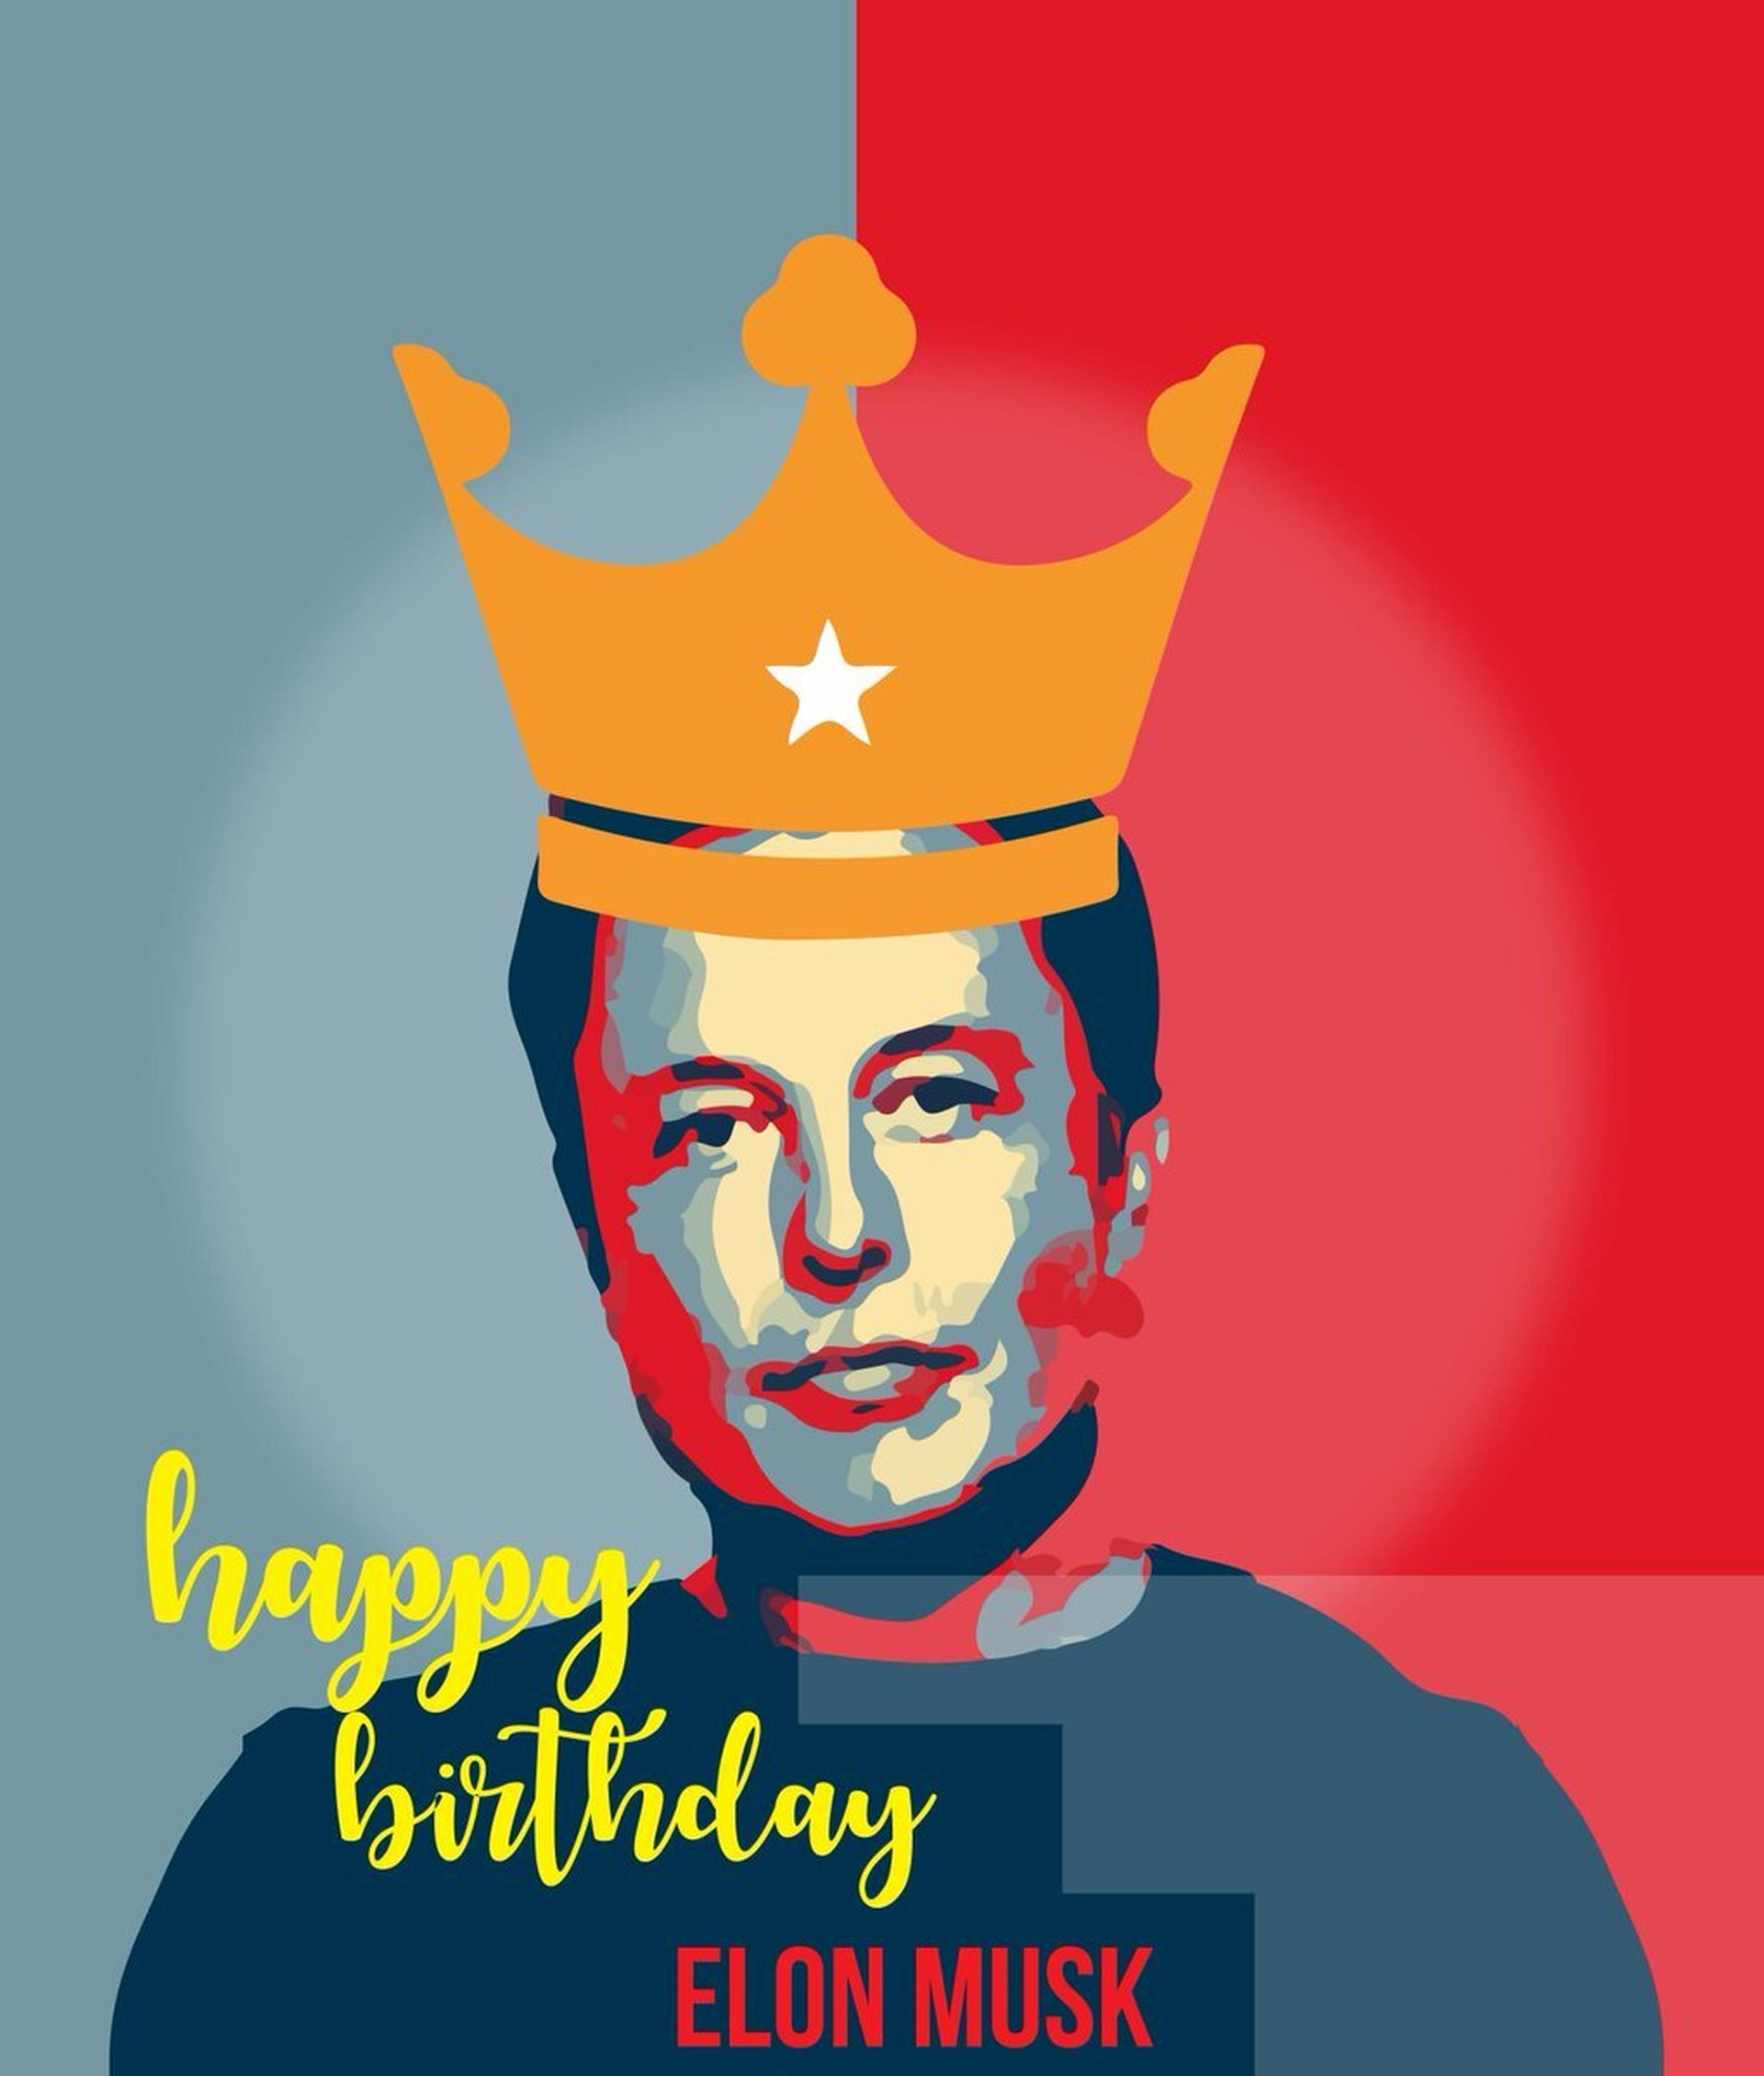 In this article, we are going to celebrate Elon Musk birthday, but also go over when was Elon Musk a billionaire, is Elon Musk born rich, and Elon Musk net worth.